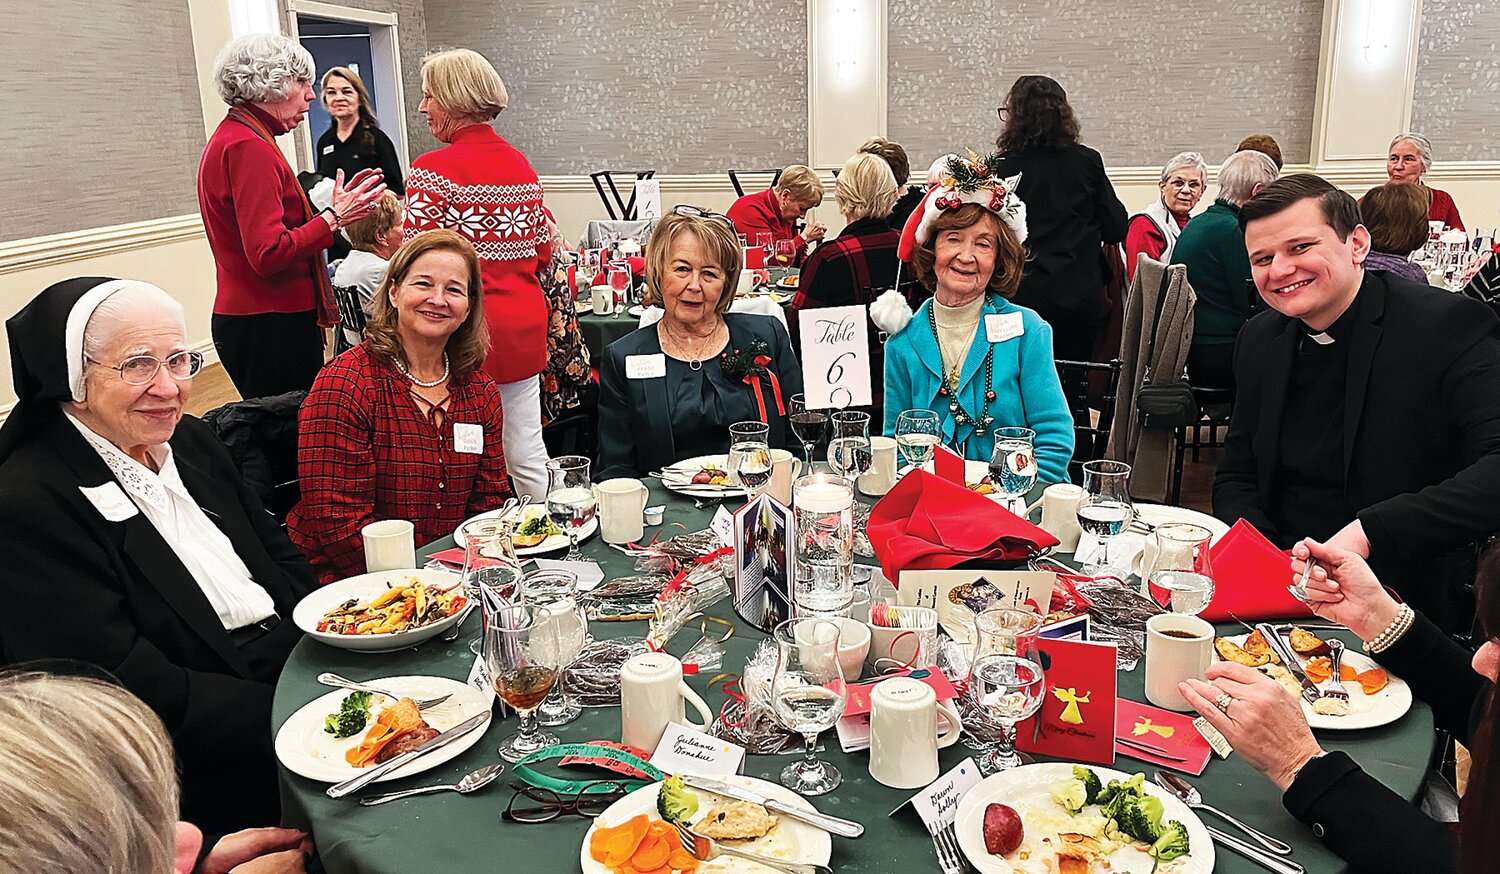 At the well-attended Ladies of Mount Carmel Christmas Luncheon Dec. 5 are, from left, Sister Thomas Ann; Dawn Parker, principal of OLMC School; Berni Padva, luncheon committee co-chair with Carol Chiappa (not pictured); Mary Ellen Stanton, committee member; and the Rev. Shane Flanagan.